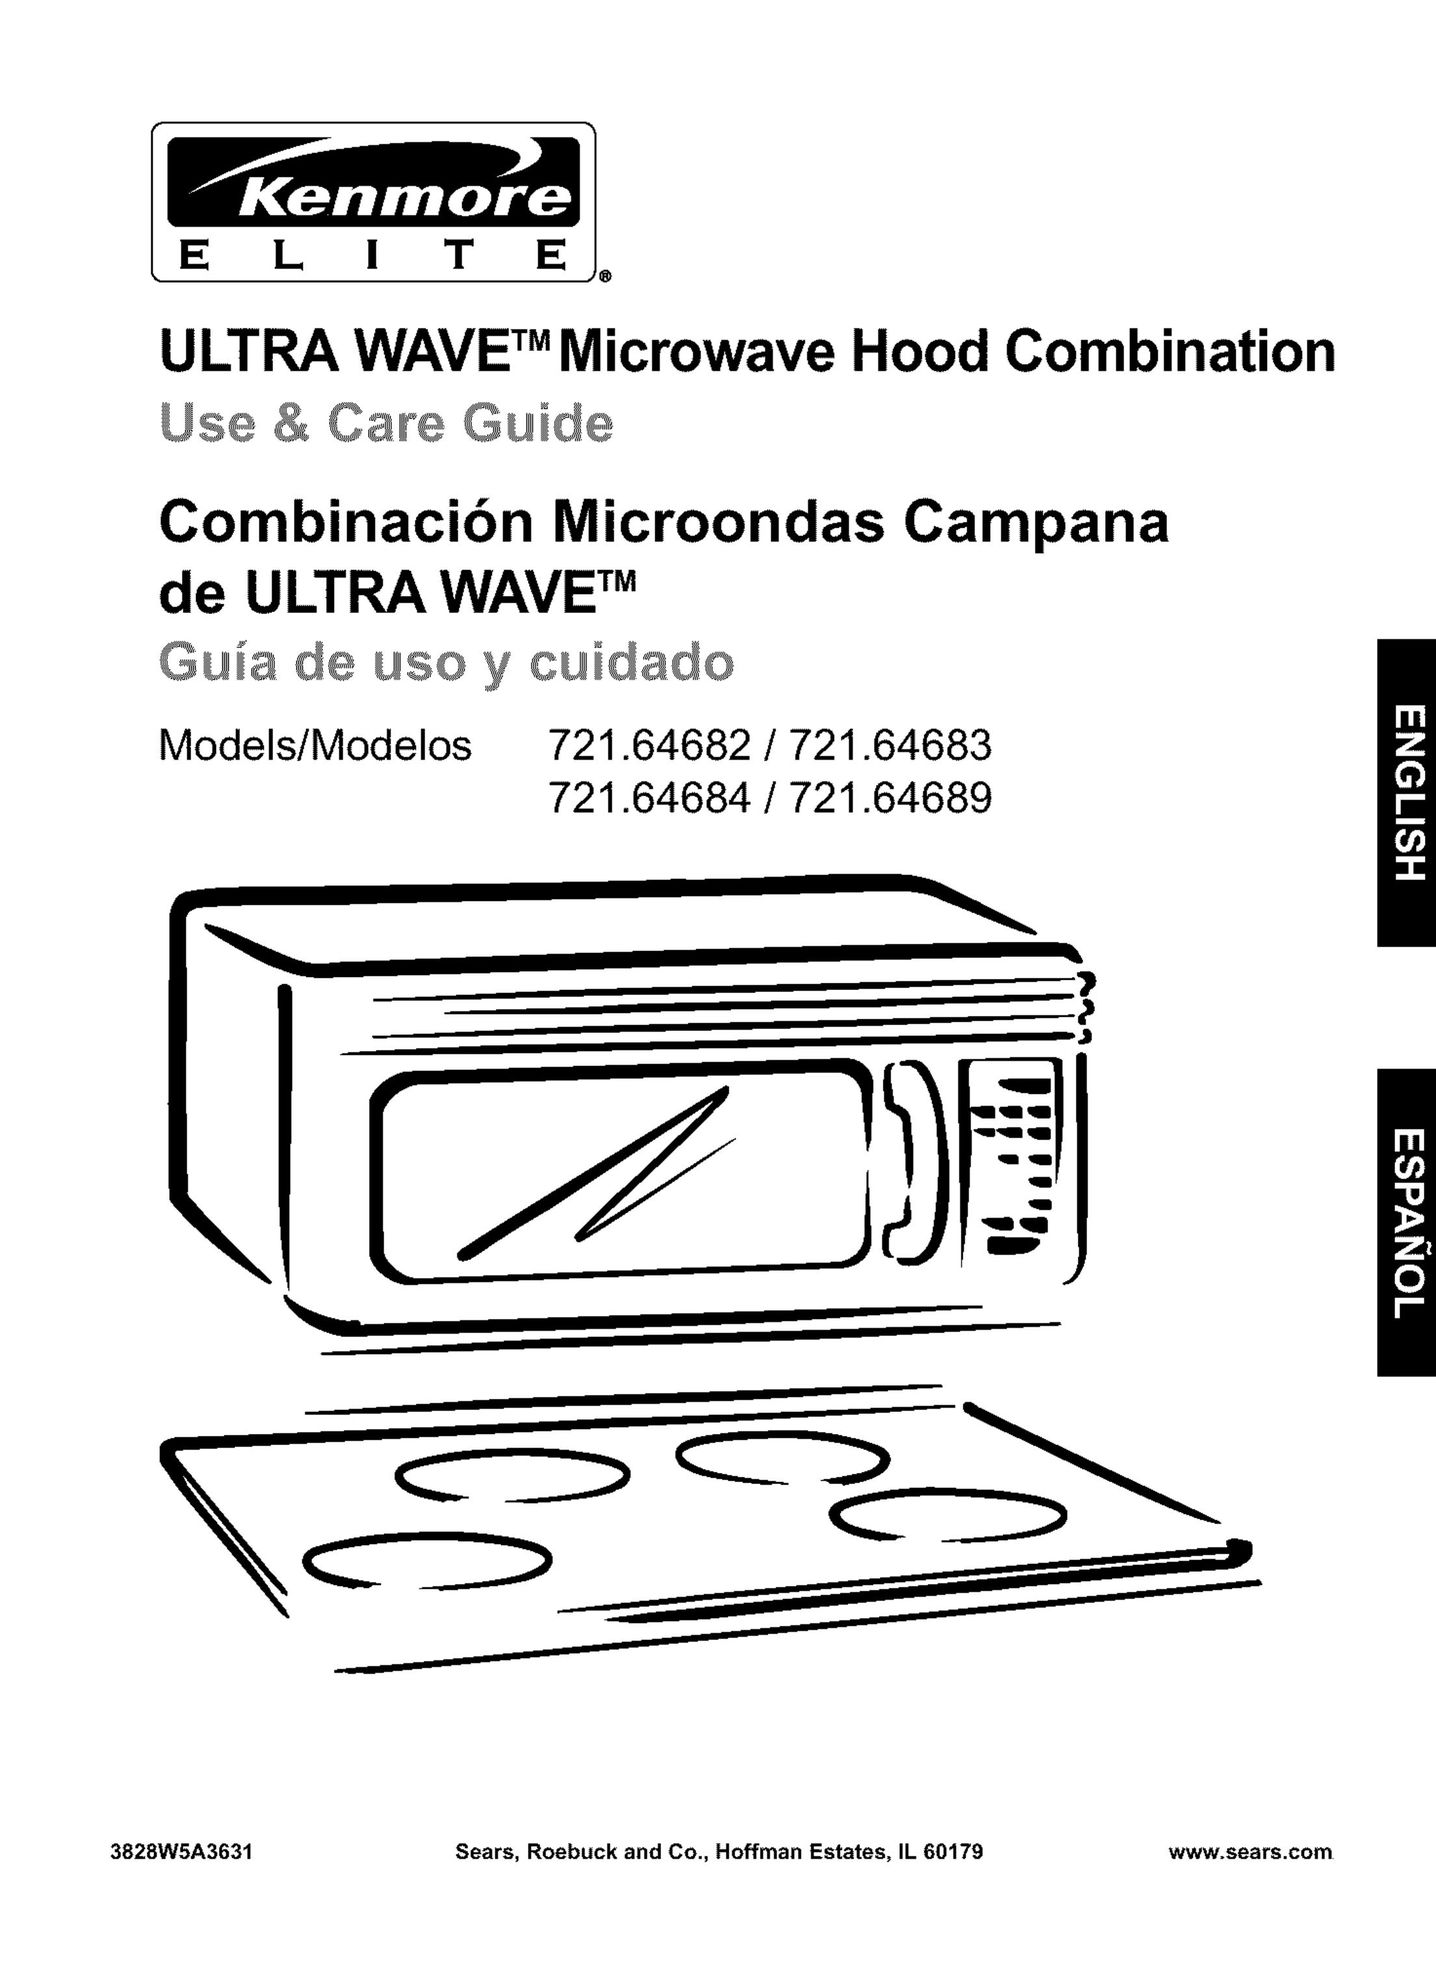 Kenmore 721.64682 Microwave Oven User Manual